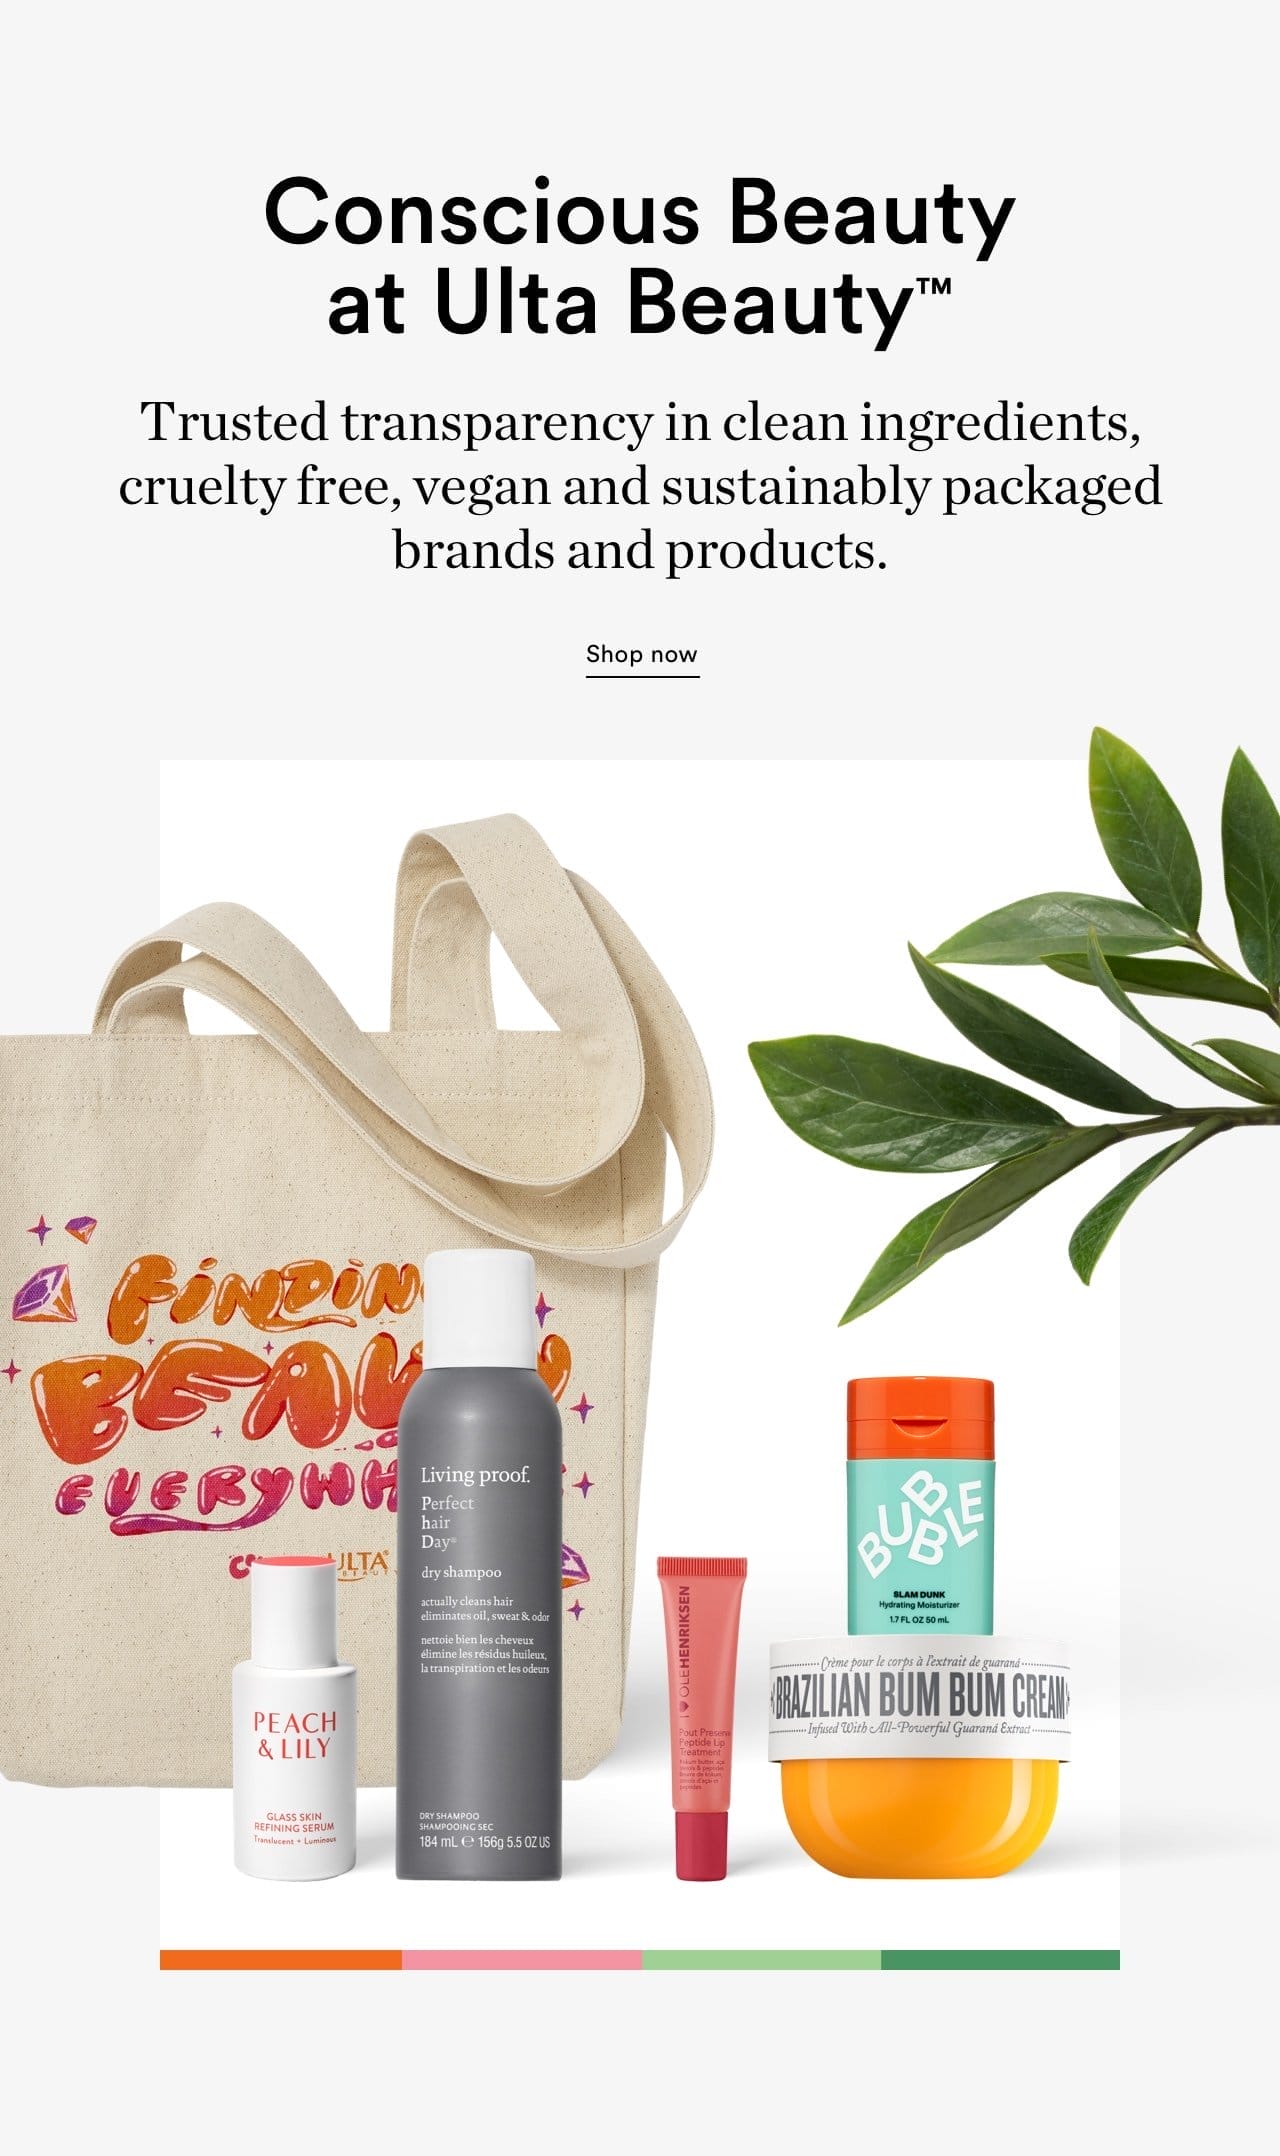 Conscious Beauty at Ulta Beauty | Trusted transparency in clean ingredients, cruelty free, vegan and sustainably packaged brands and products | Shop now